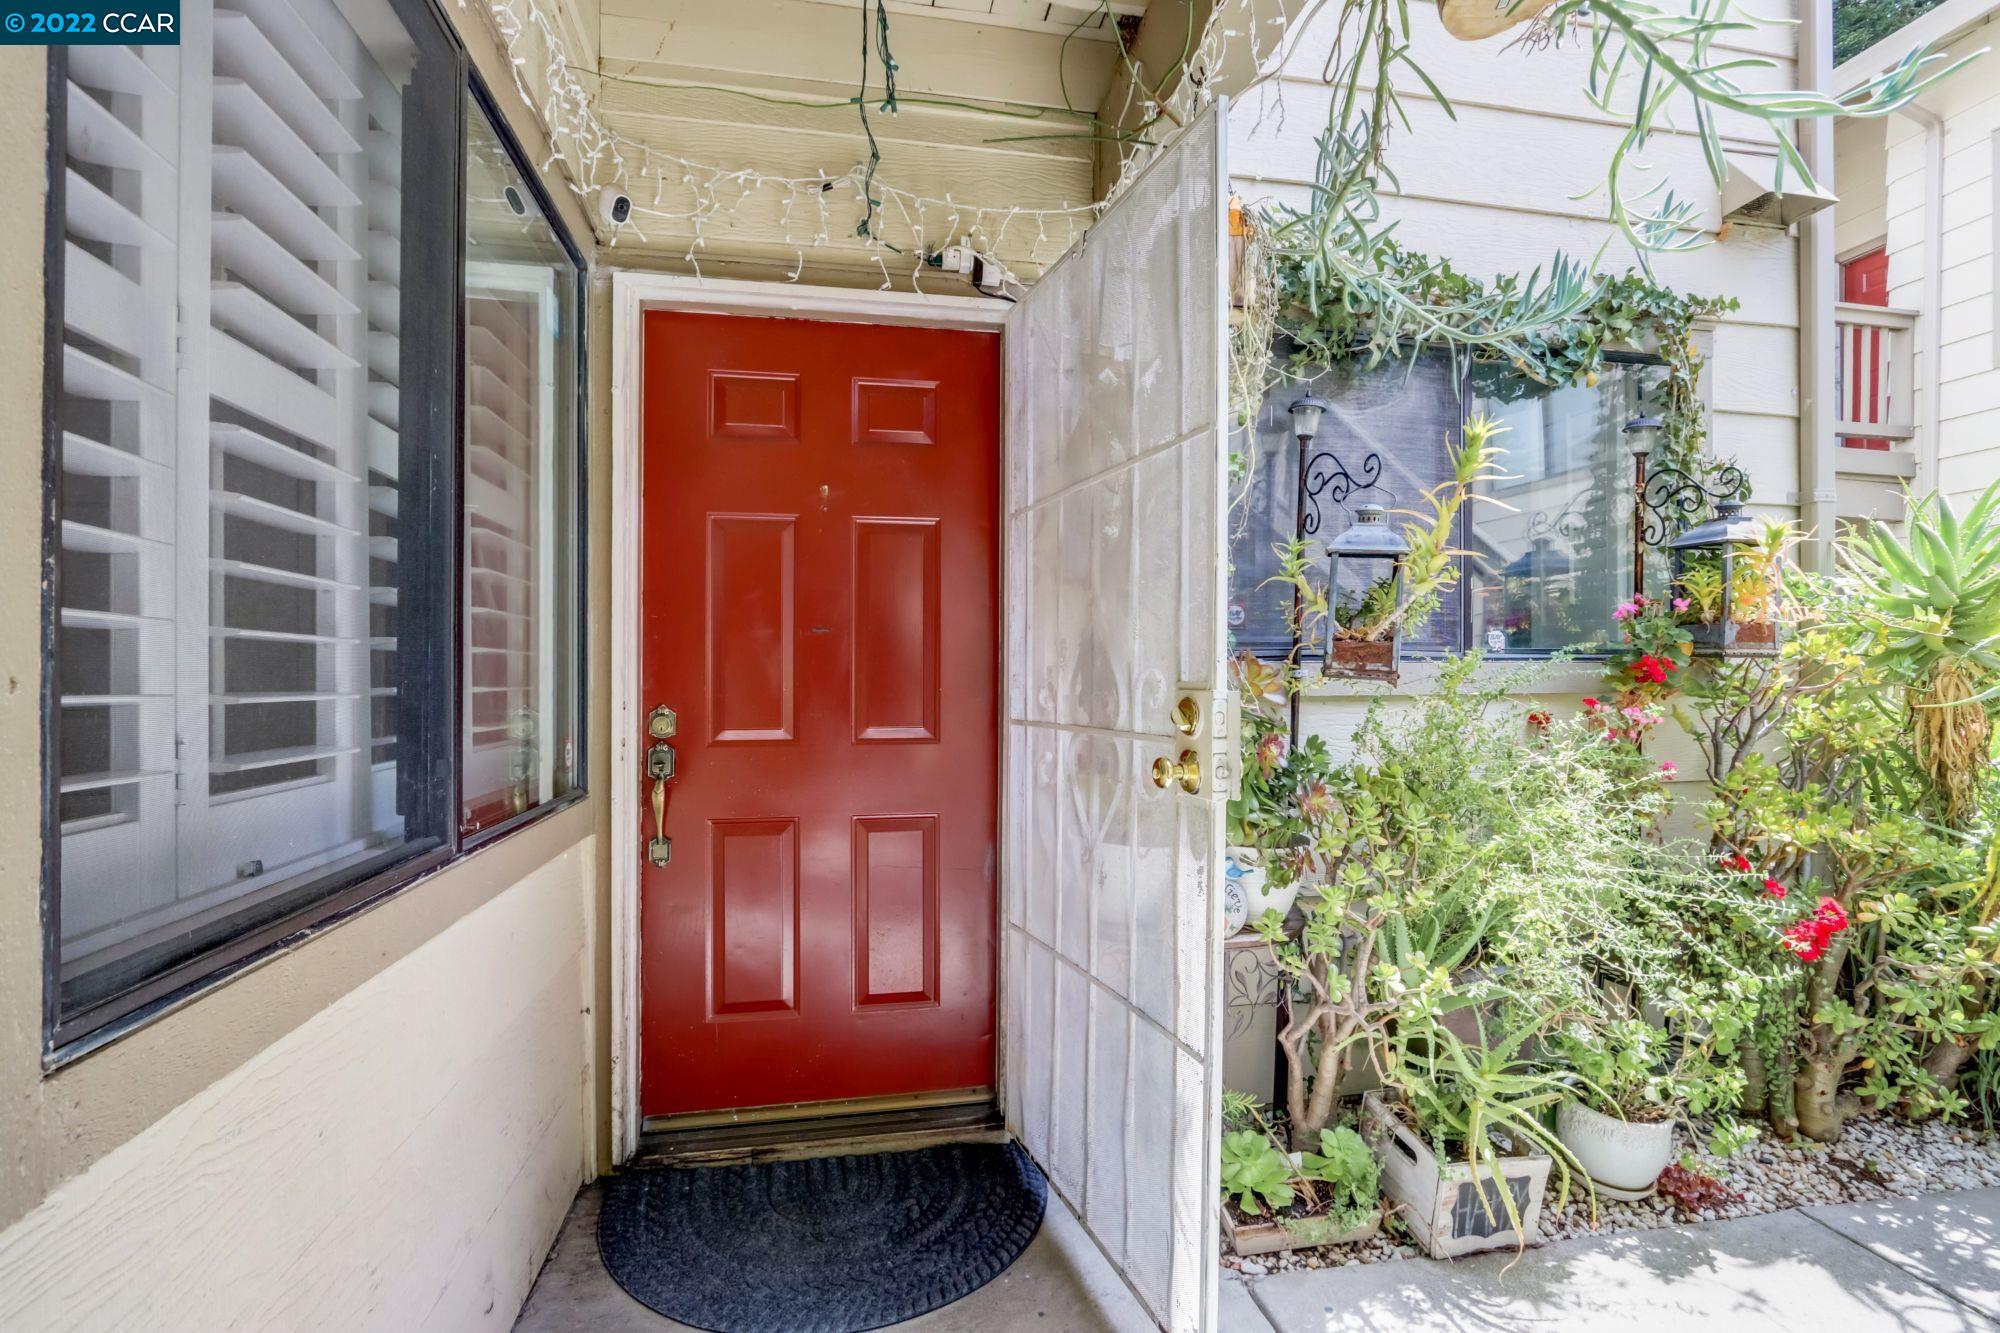 a view of front door of house with potted plant